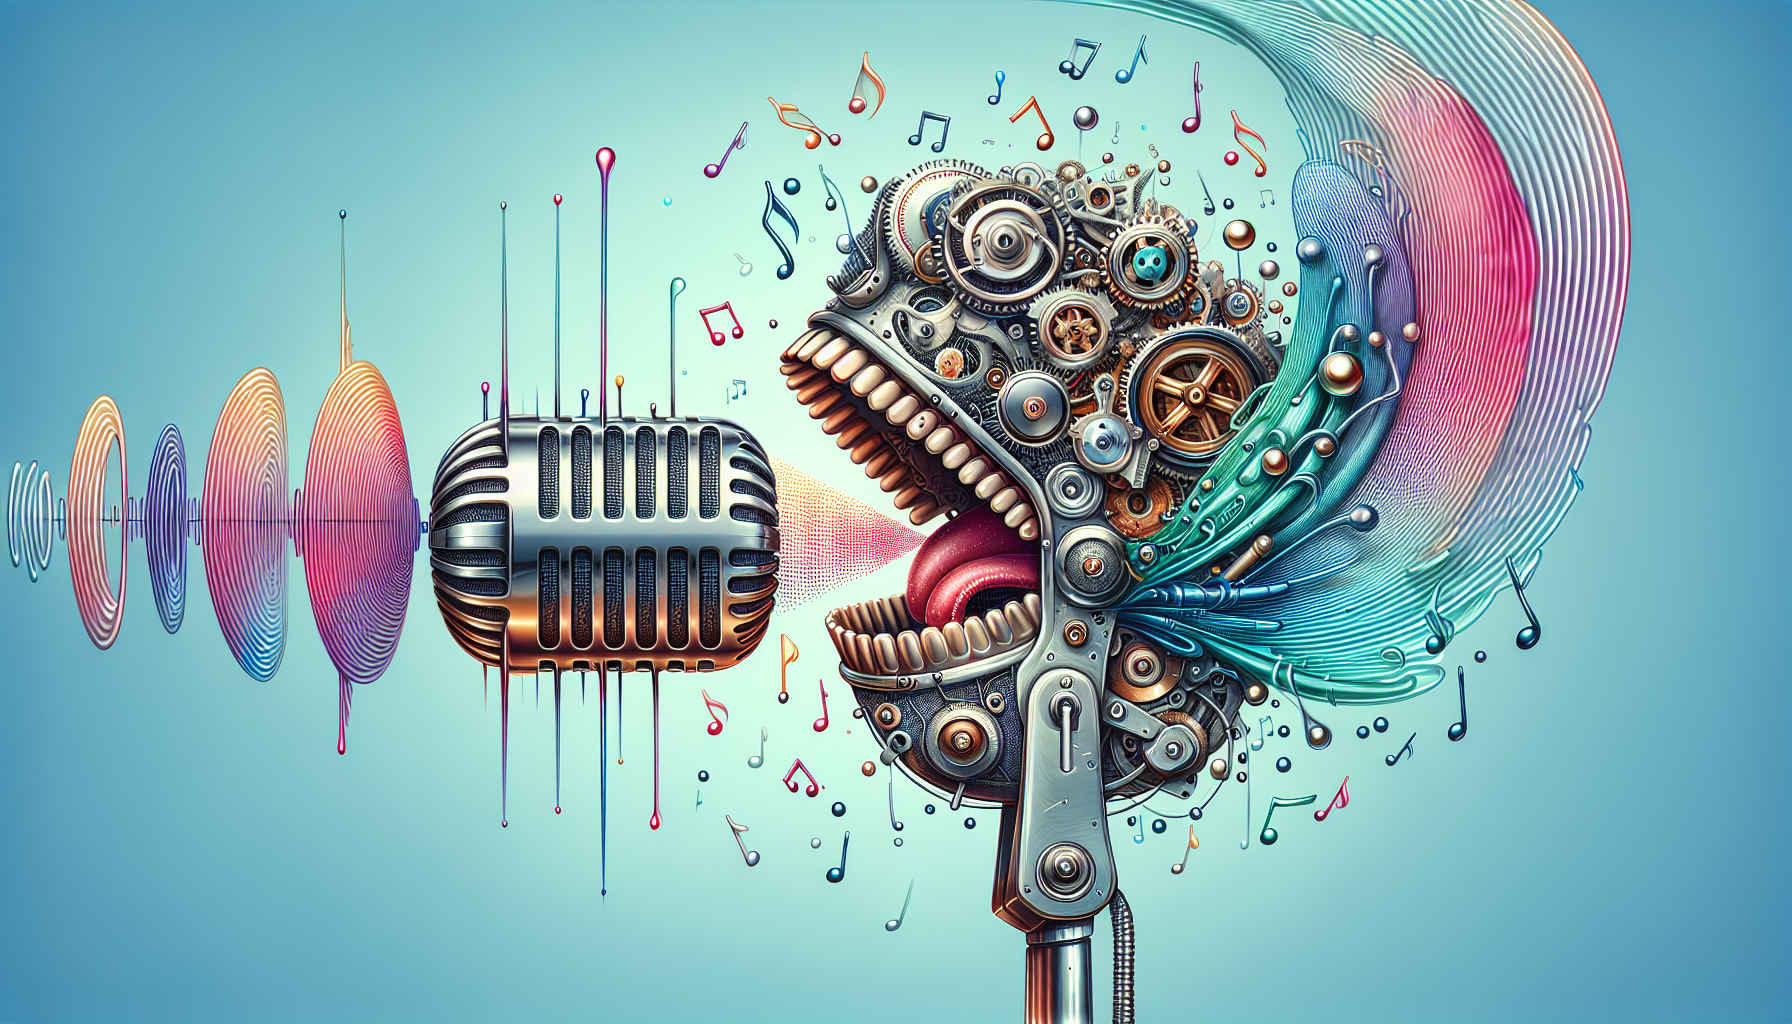 A robotic mouth speaking into a vintage microphone, surrounded by sound waves with floating musical notes, with a transparent price tag on the microphone saying Free.